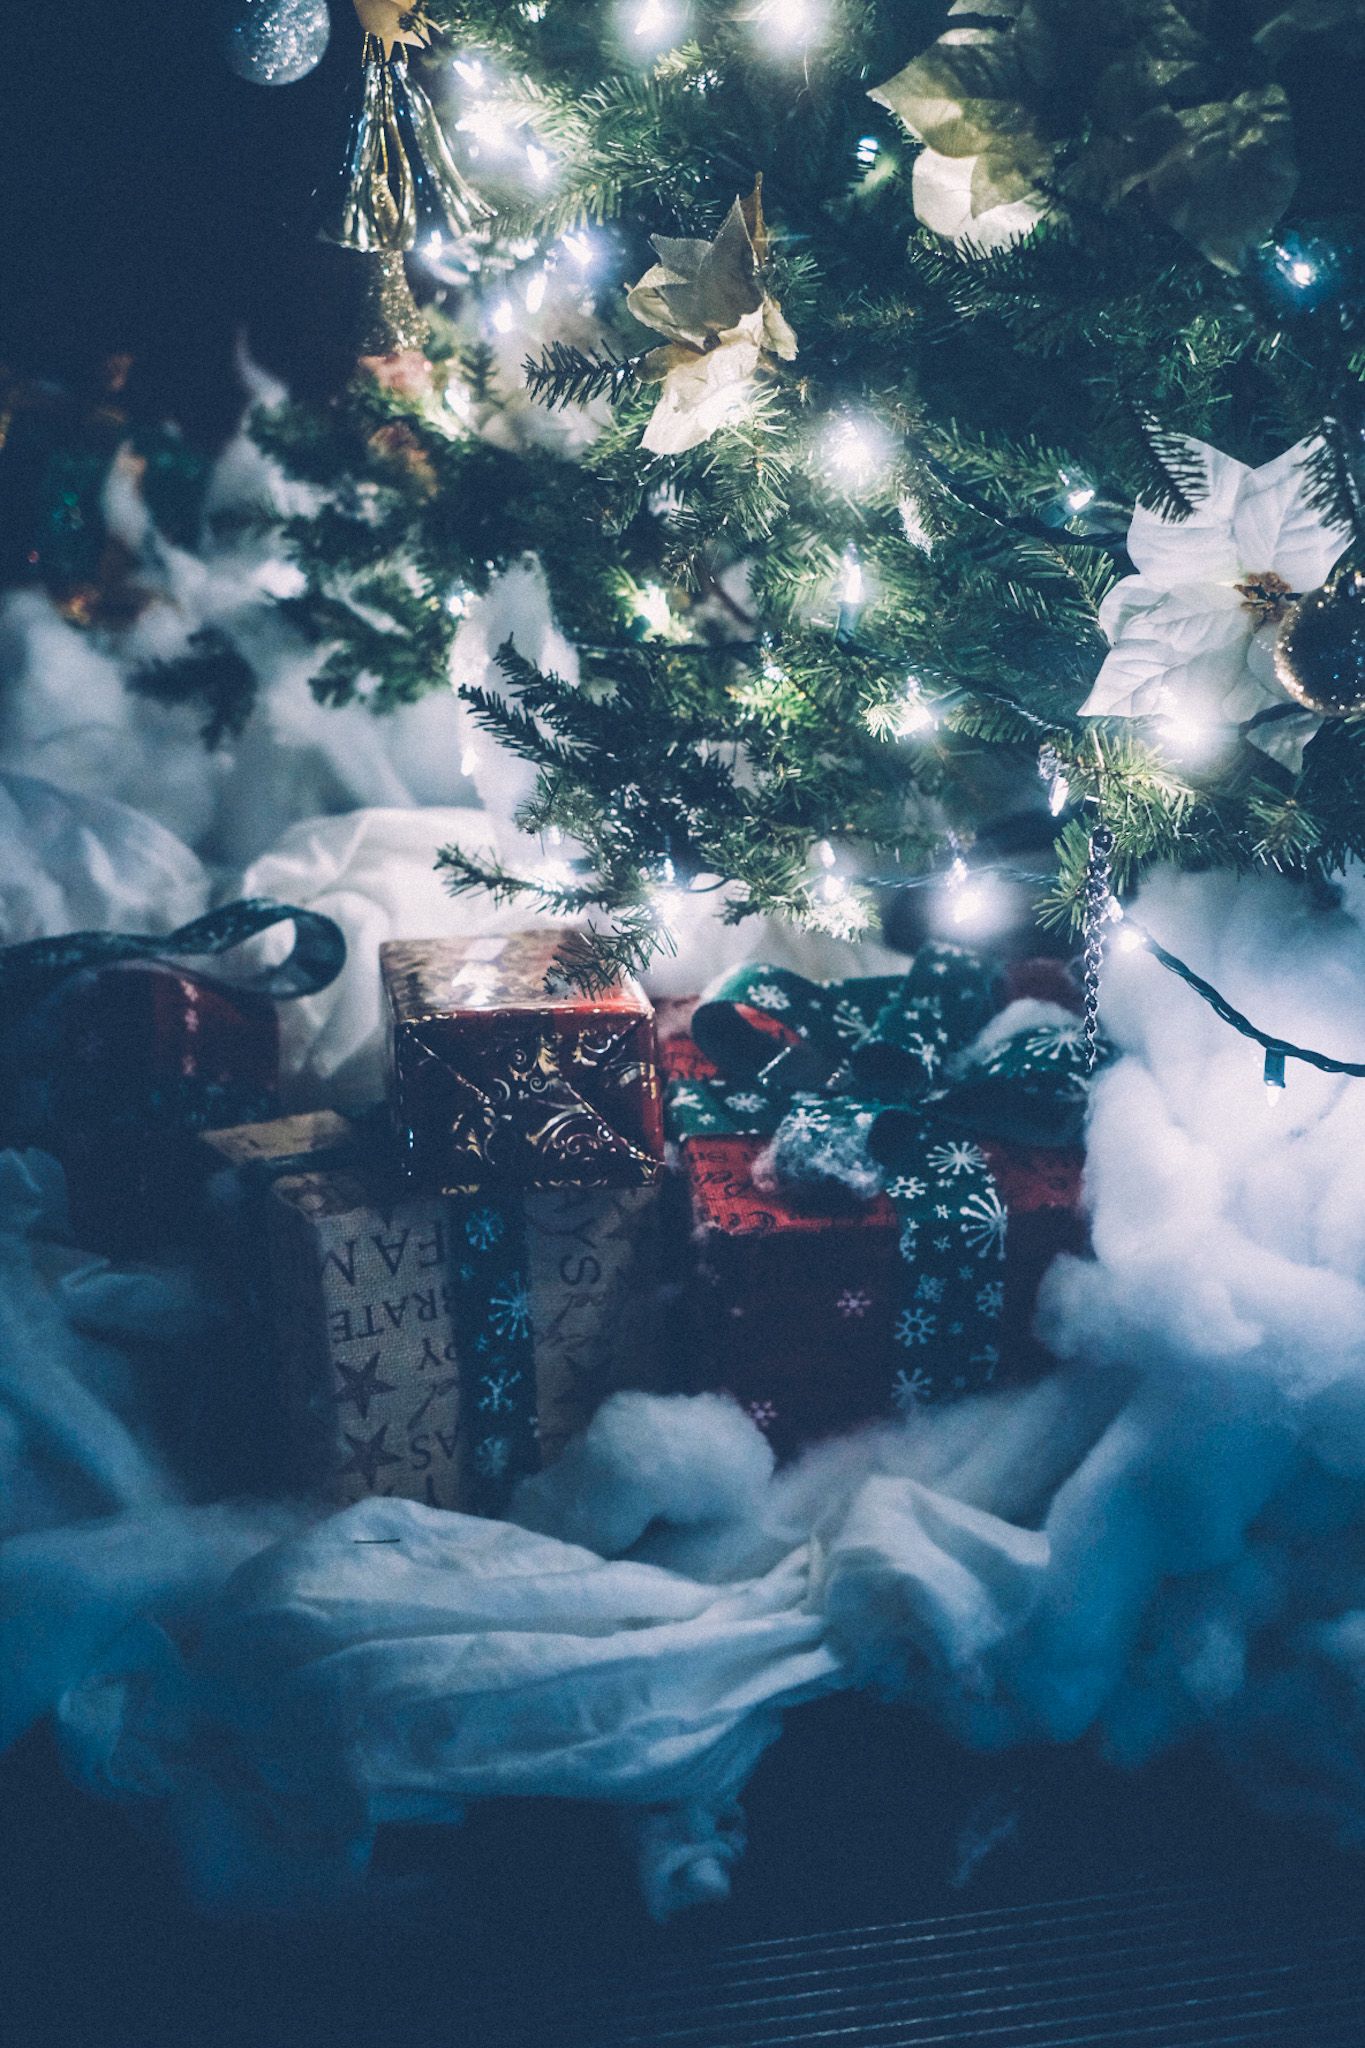 A pile of Christmas presents sits under a decorated tree with soft white lights, all atop fake snow.